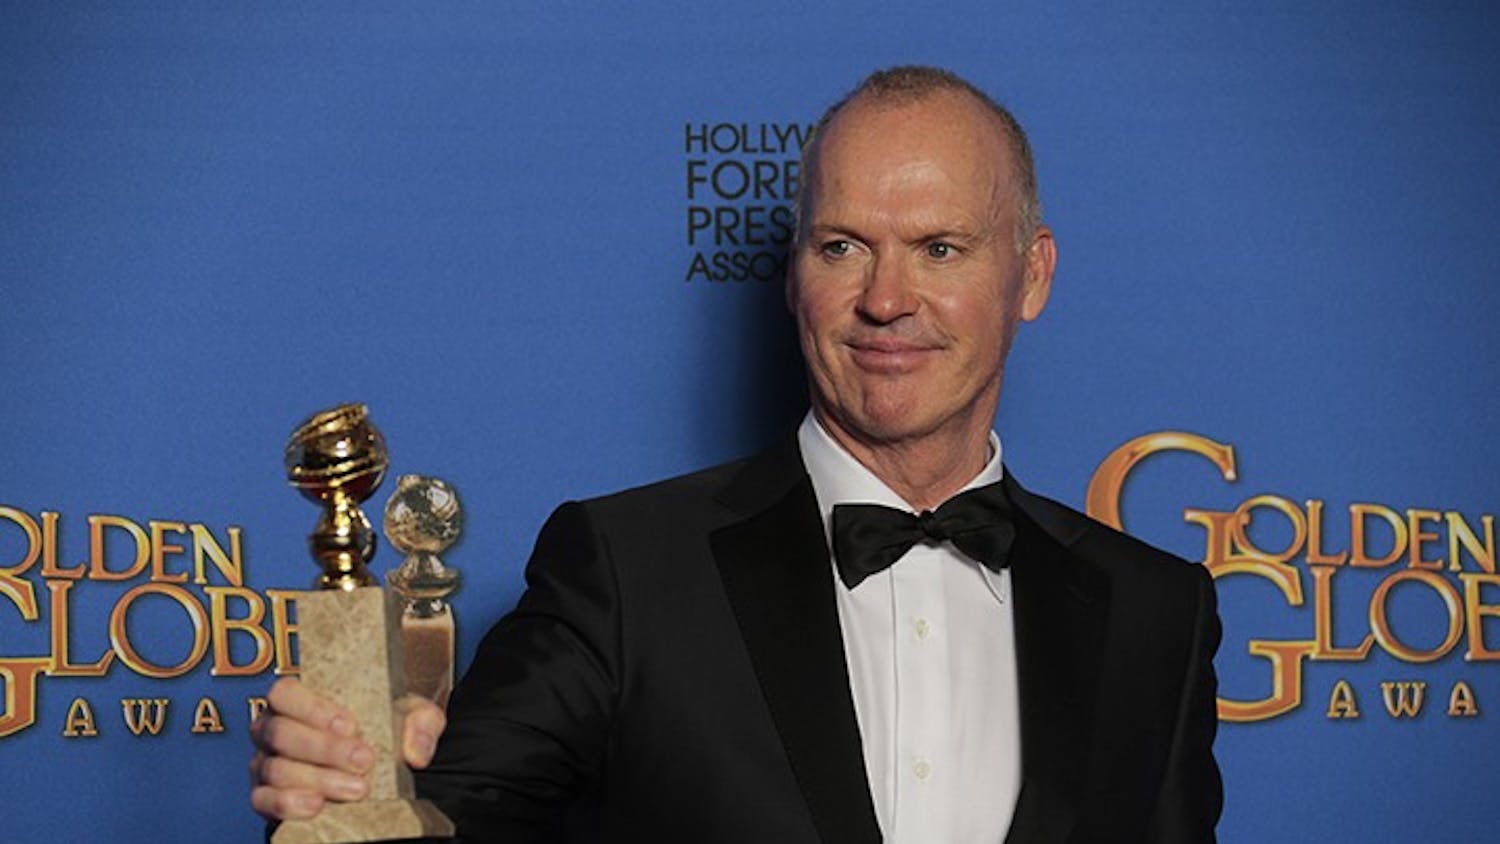 Michael Keaton backstage at the 72nd Annual Golden Globe Awards show at the Beverly Hilton Hotel in Beverly Hills, Calif., on Sunday, Jan. 11, 2015. (Lawrence K. Ho/Los Angeles Times/TNS)